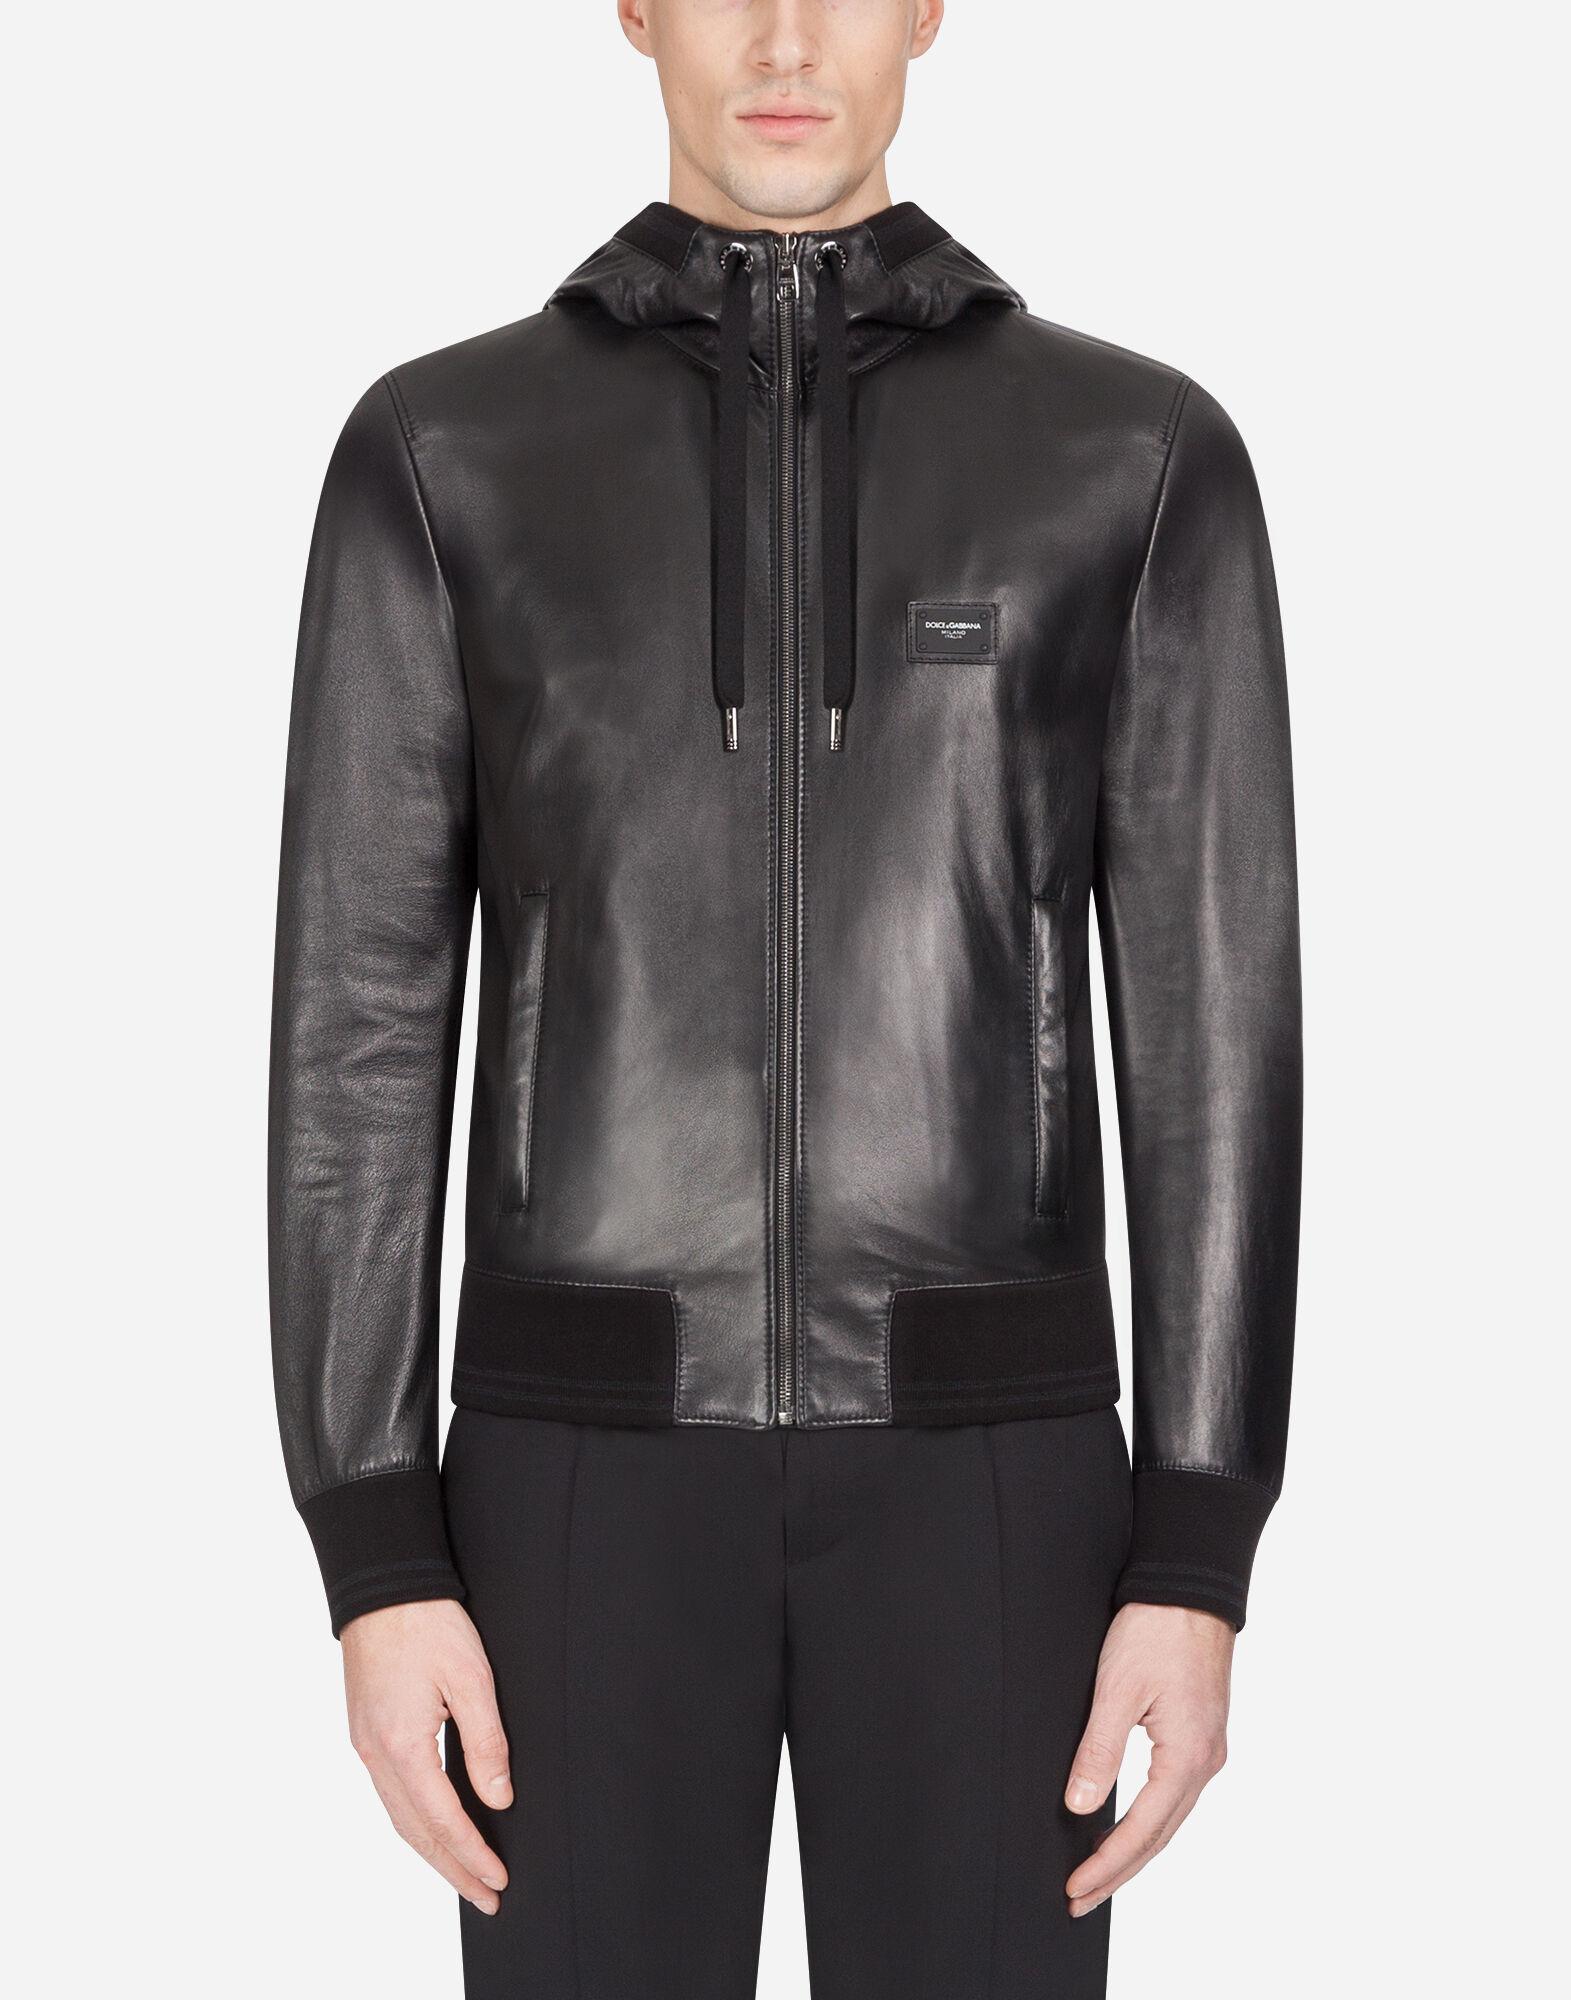 Dolce & Gabbana Leather Jacket With Hood And Branded Plate in Black for